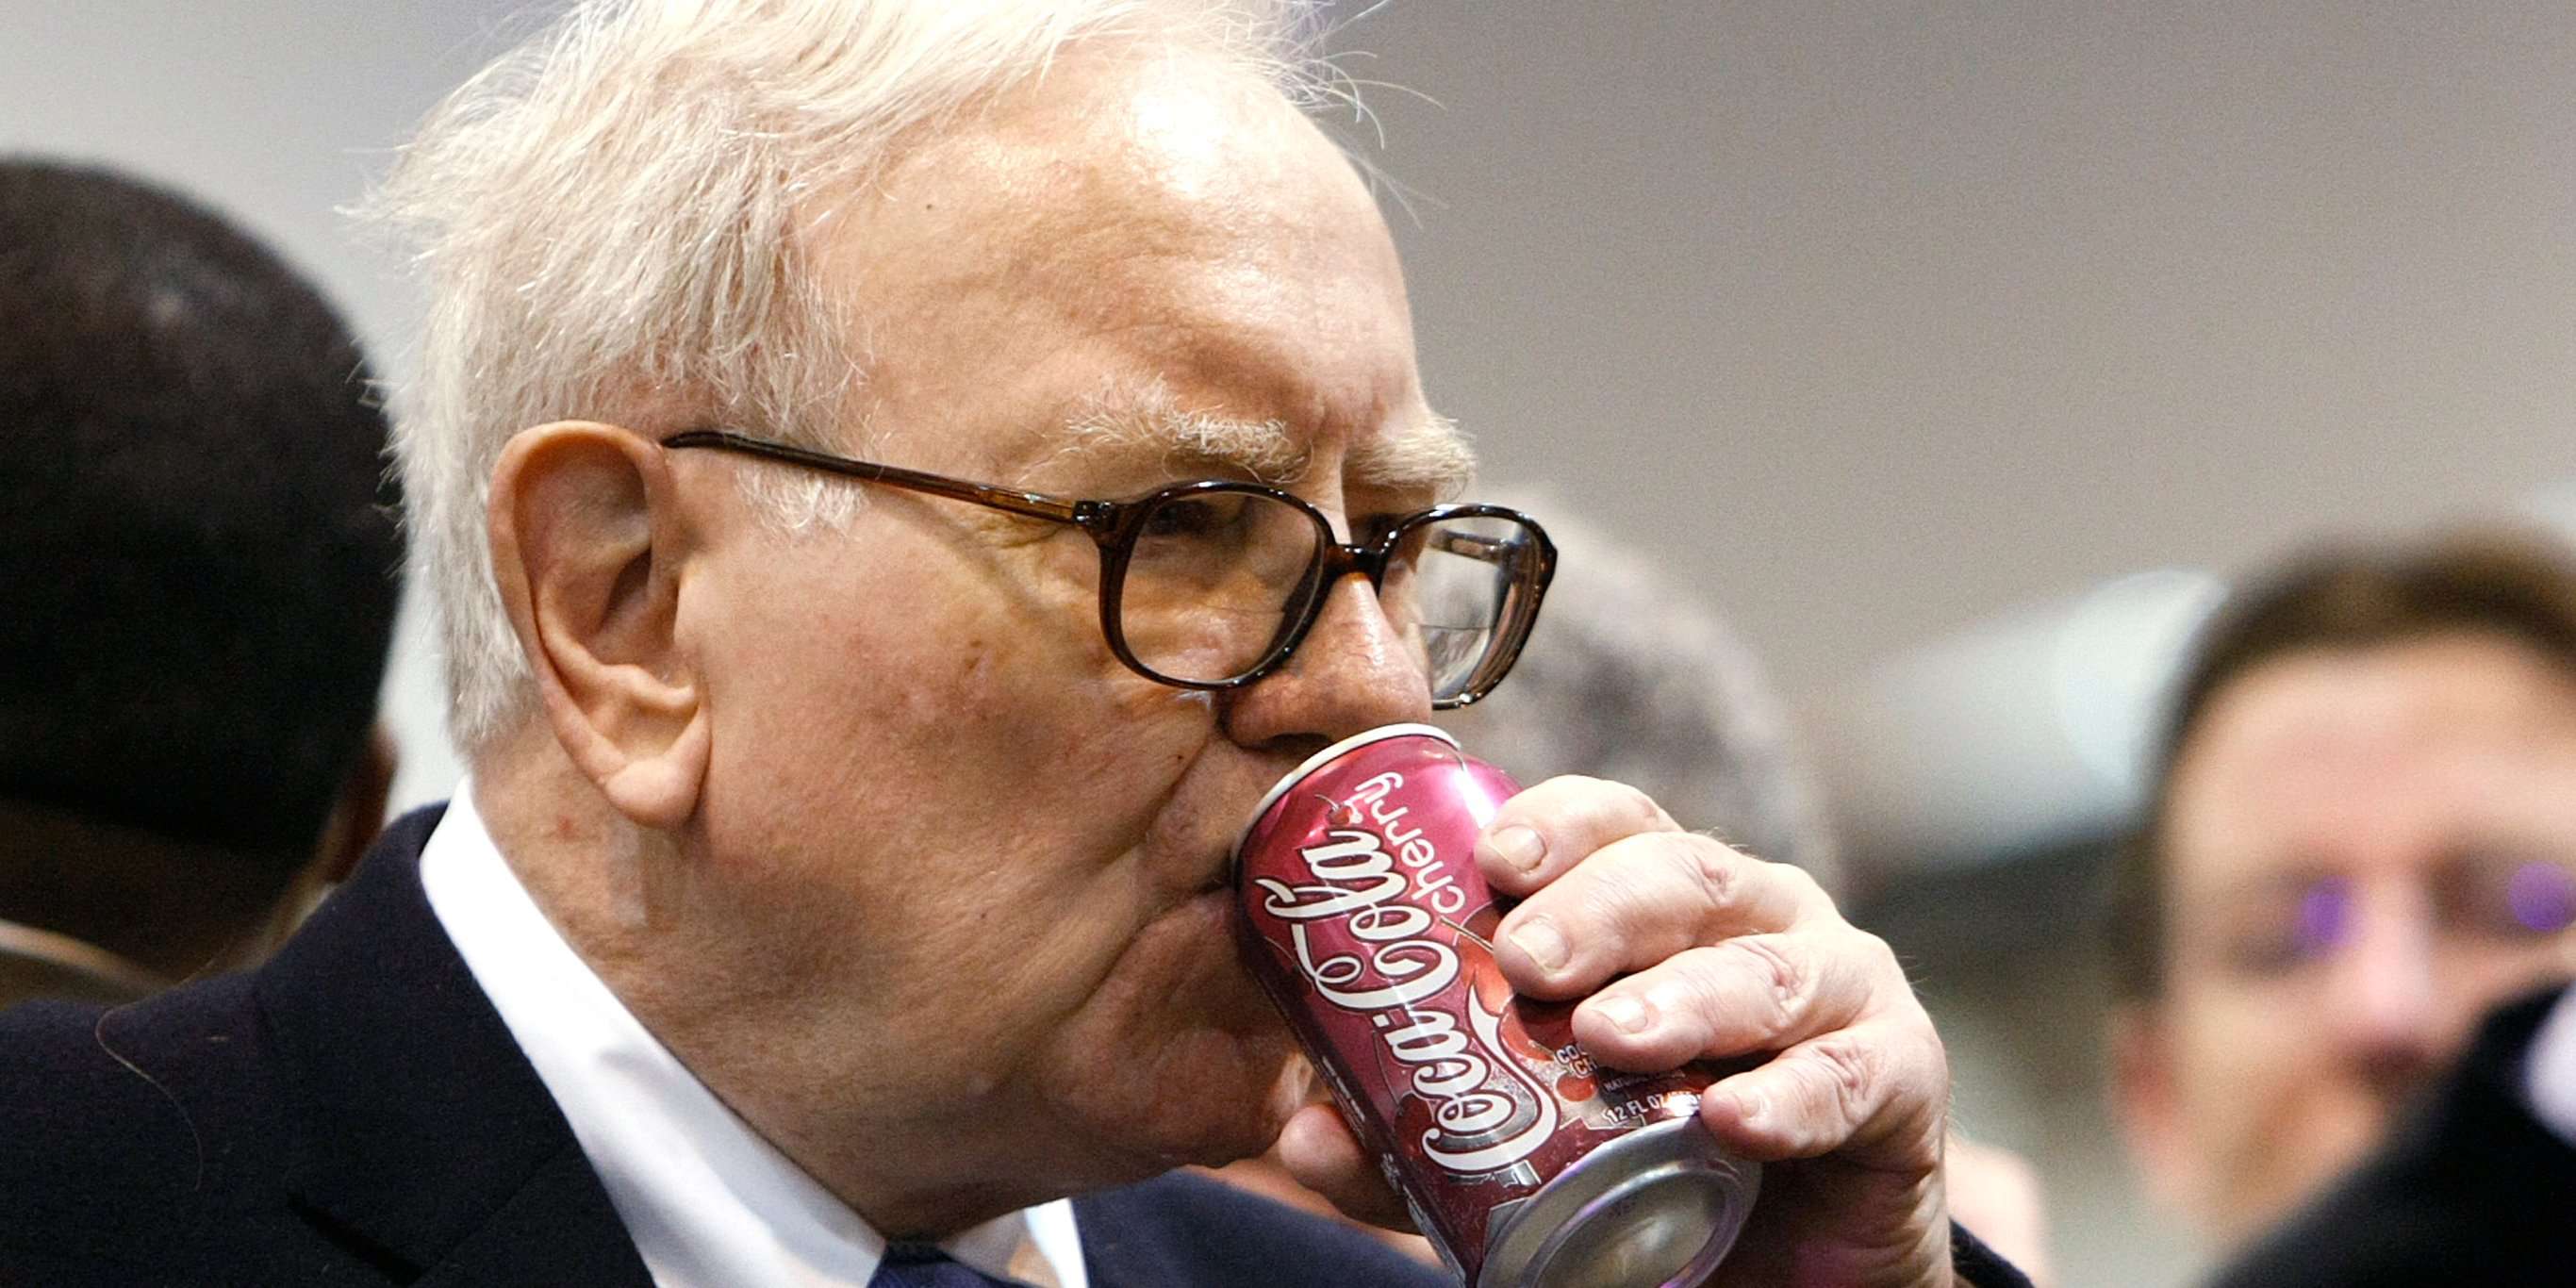 Taboola Ad Example 49451 - Warren Buffett, The Third-richest Person In The World, Is Also One Of The Most Frugal Billionaires. Here's How He Makes And Spends His Fortune.